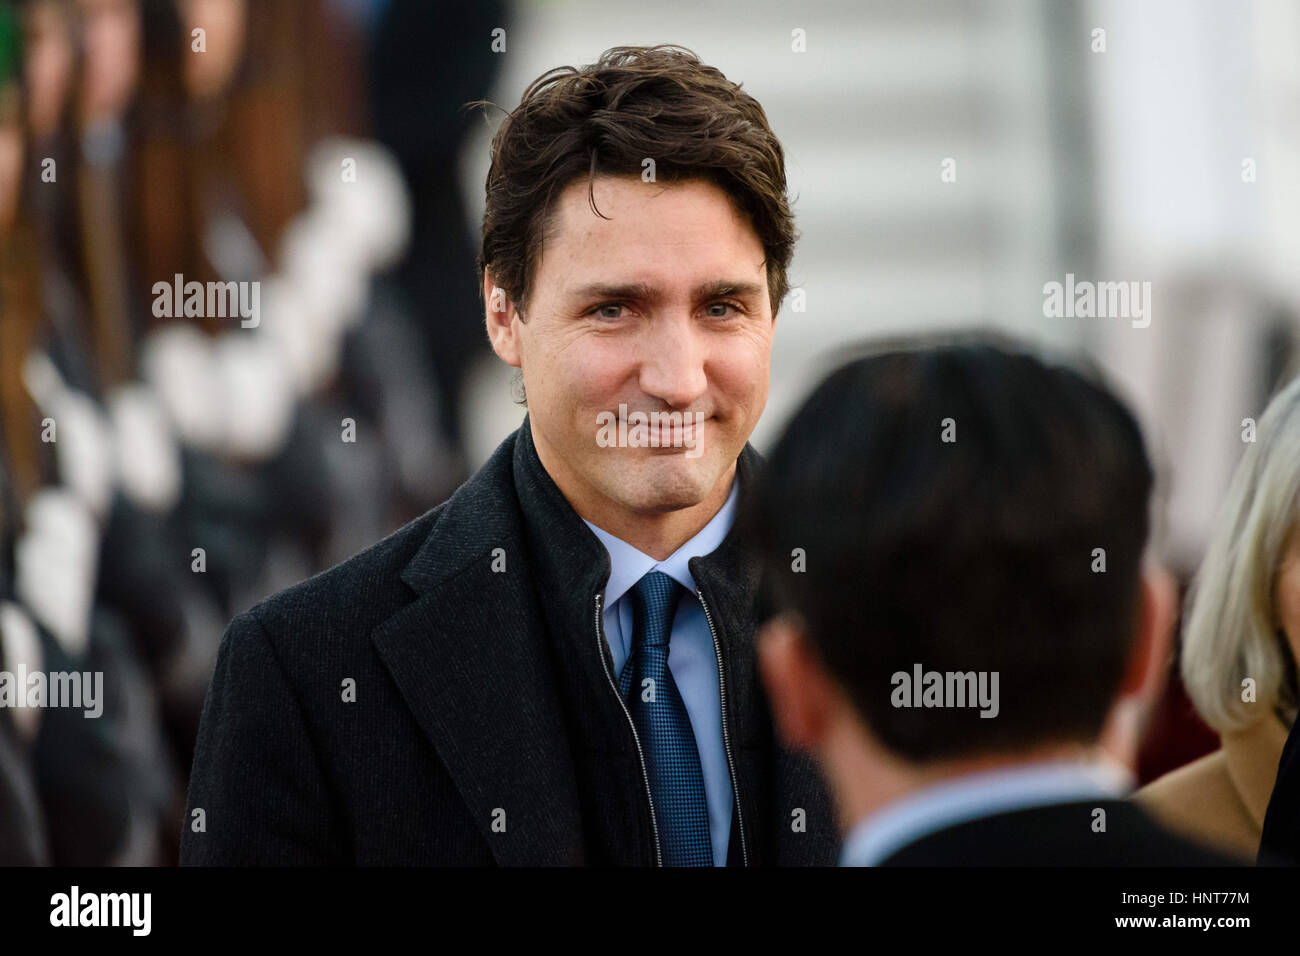 Berlin, Germany. 16th Feb, 2017. Canada's Prime Minister Justin Trudeau arrives at the military part of Tegel airport for a three-day state visit in Berlin, Germany, 16 February 2017. Photo: Gregor Fischer/dpa/Alamy Live News Stock Photo